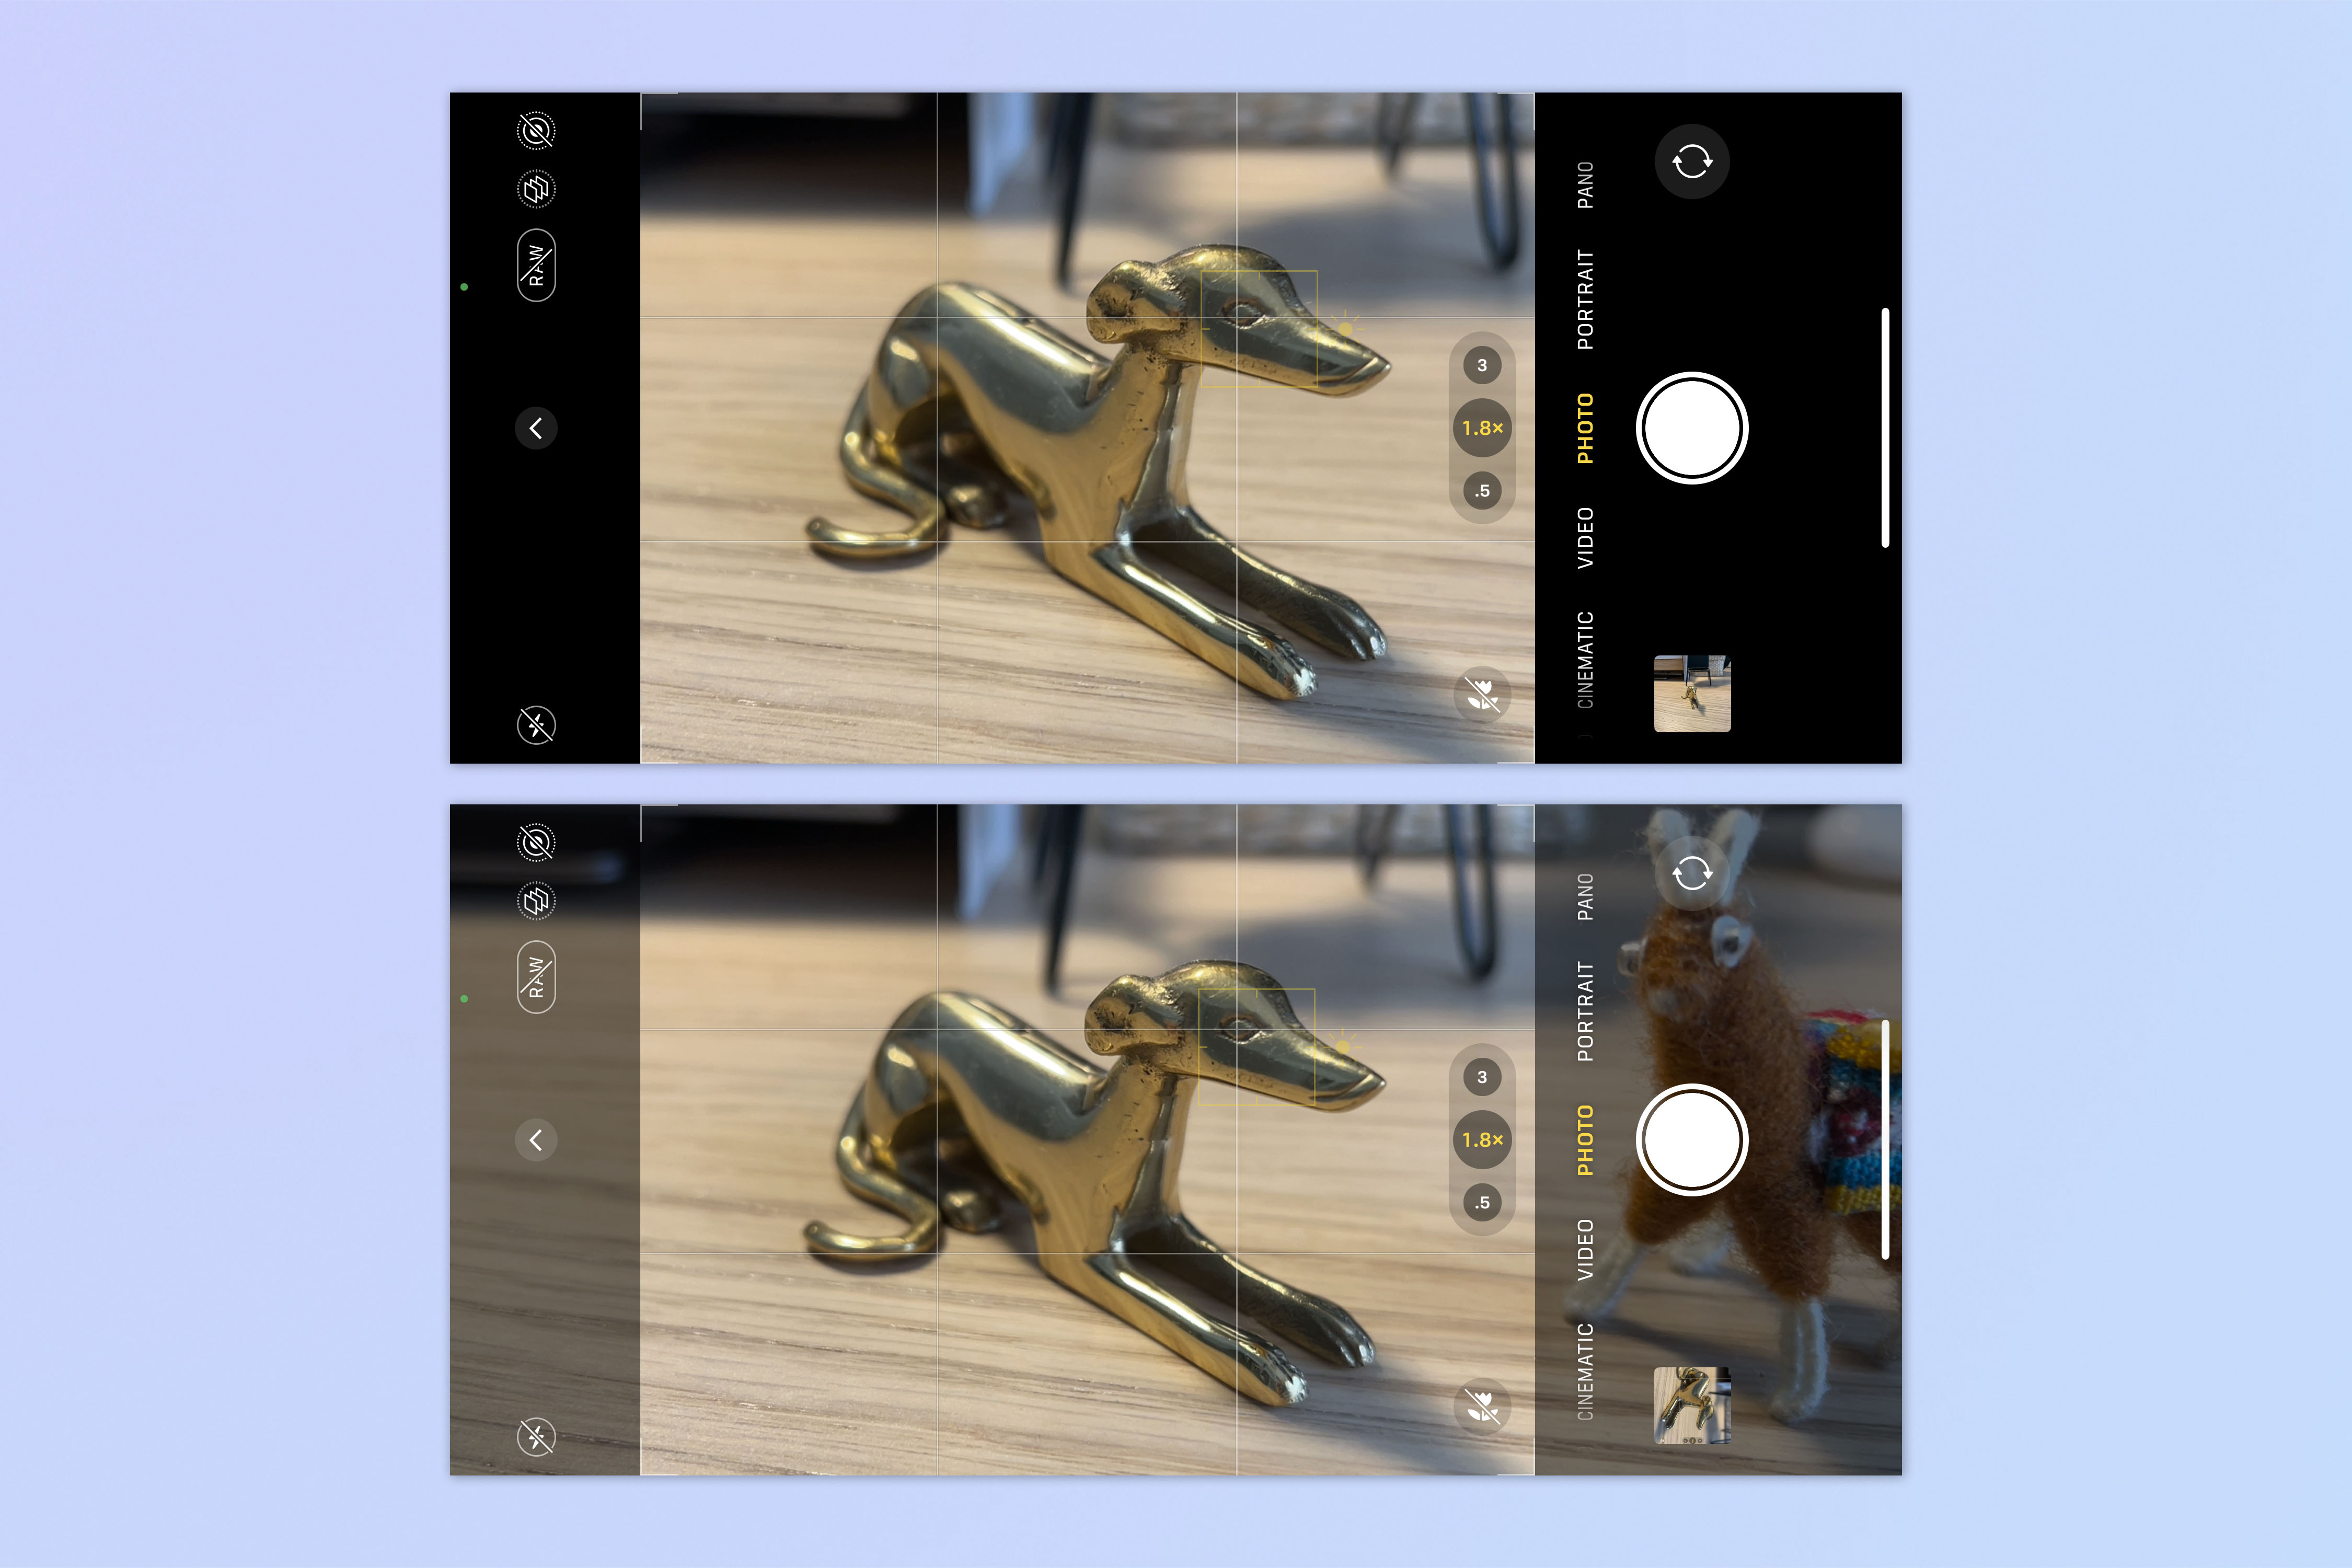 Two screenshots of the iPhone camera in horizontal orientation. The top image shows a brass model of a dog in frame, while the lower image shows the dog as well as a toy alpaca at the outskirts of the image once View Outside the Frame is enabled.